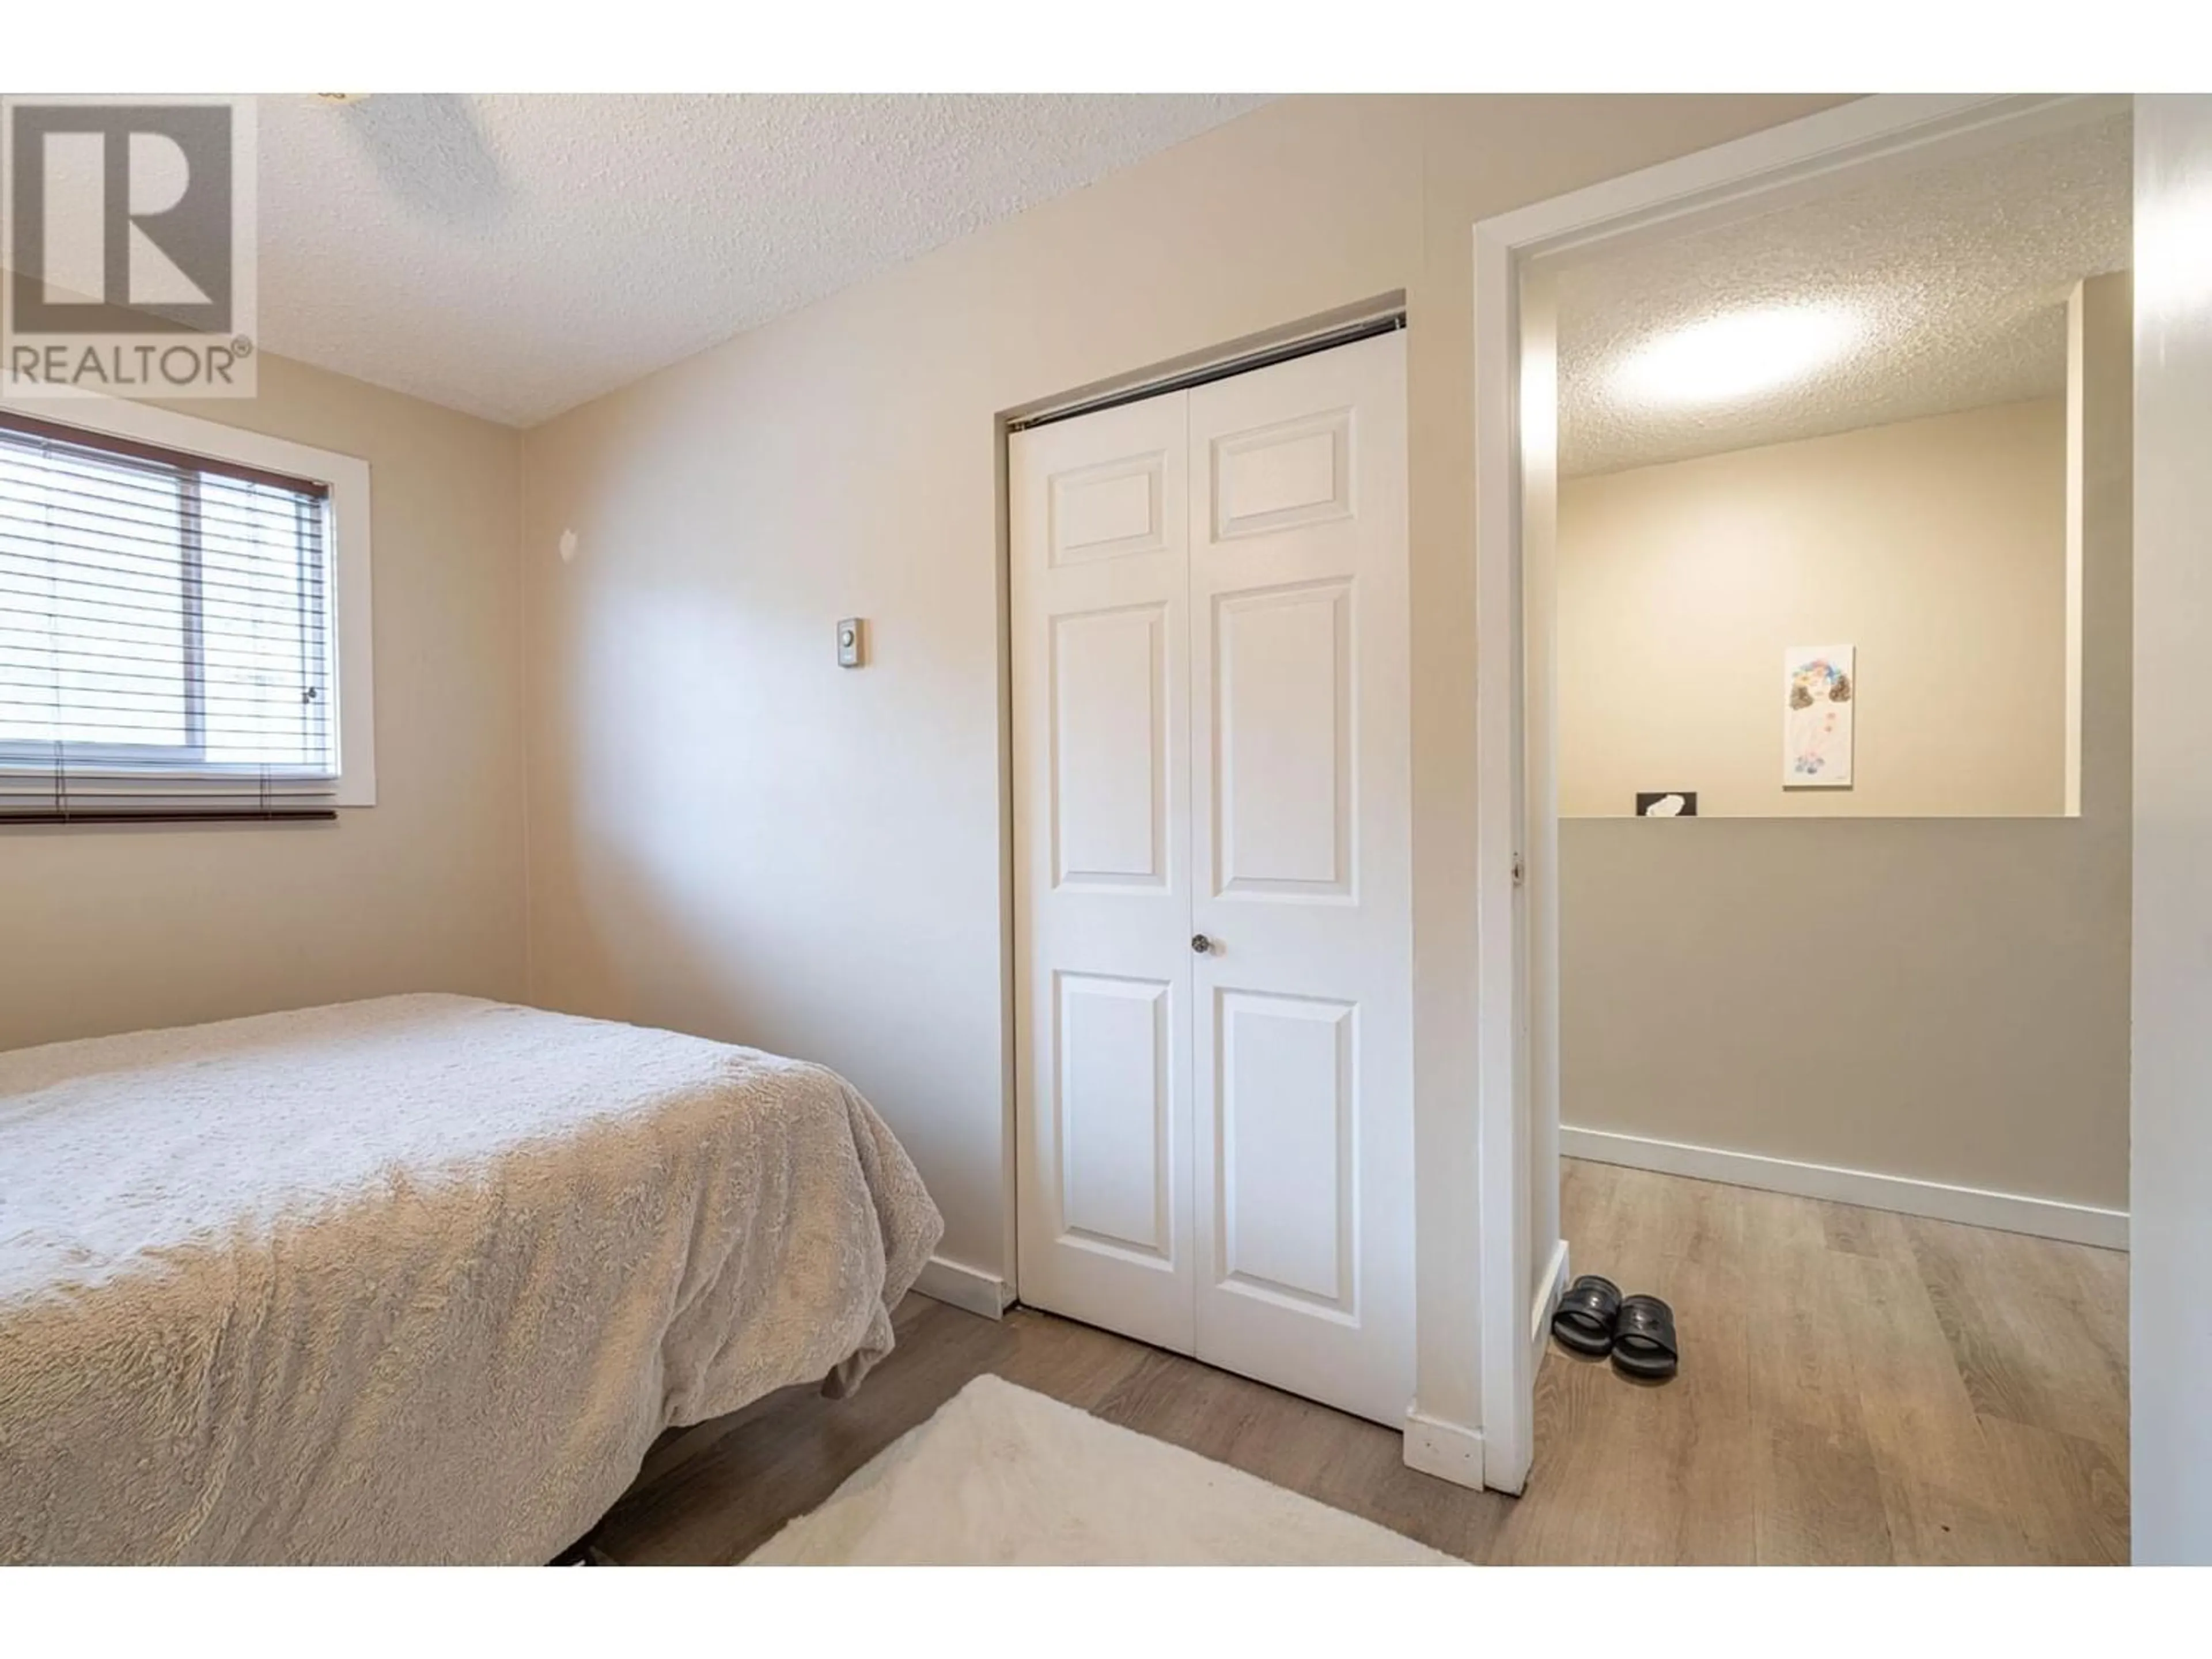 Storage room or clothes room or walk-in closet for 90-1605 SUMMIT DRIVE, Kamloops British Columbia V2E2A5